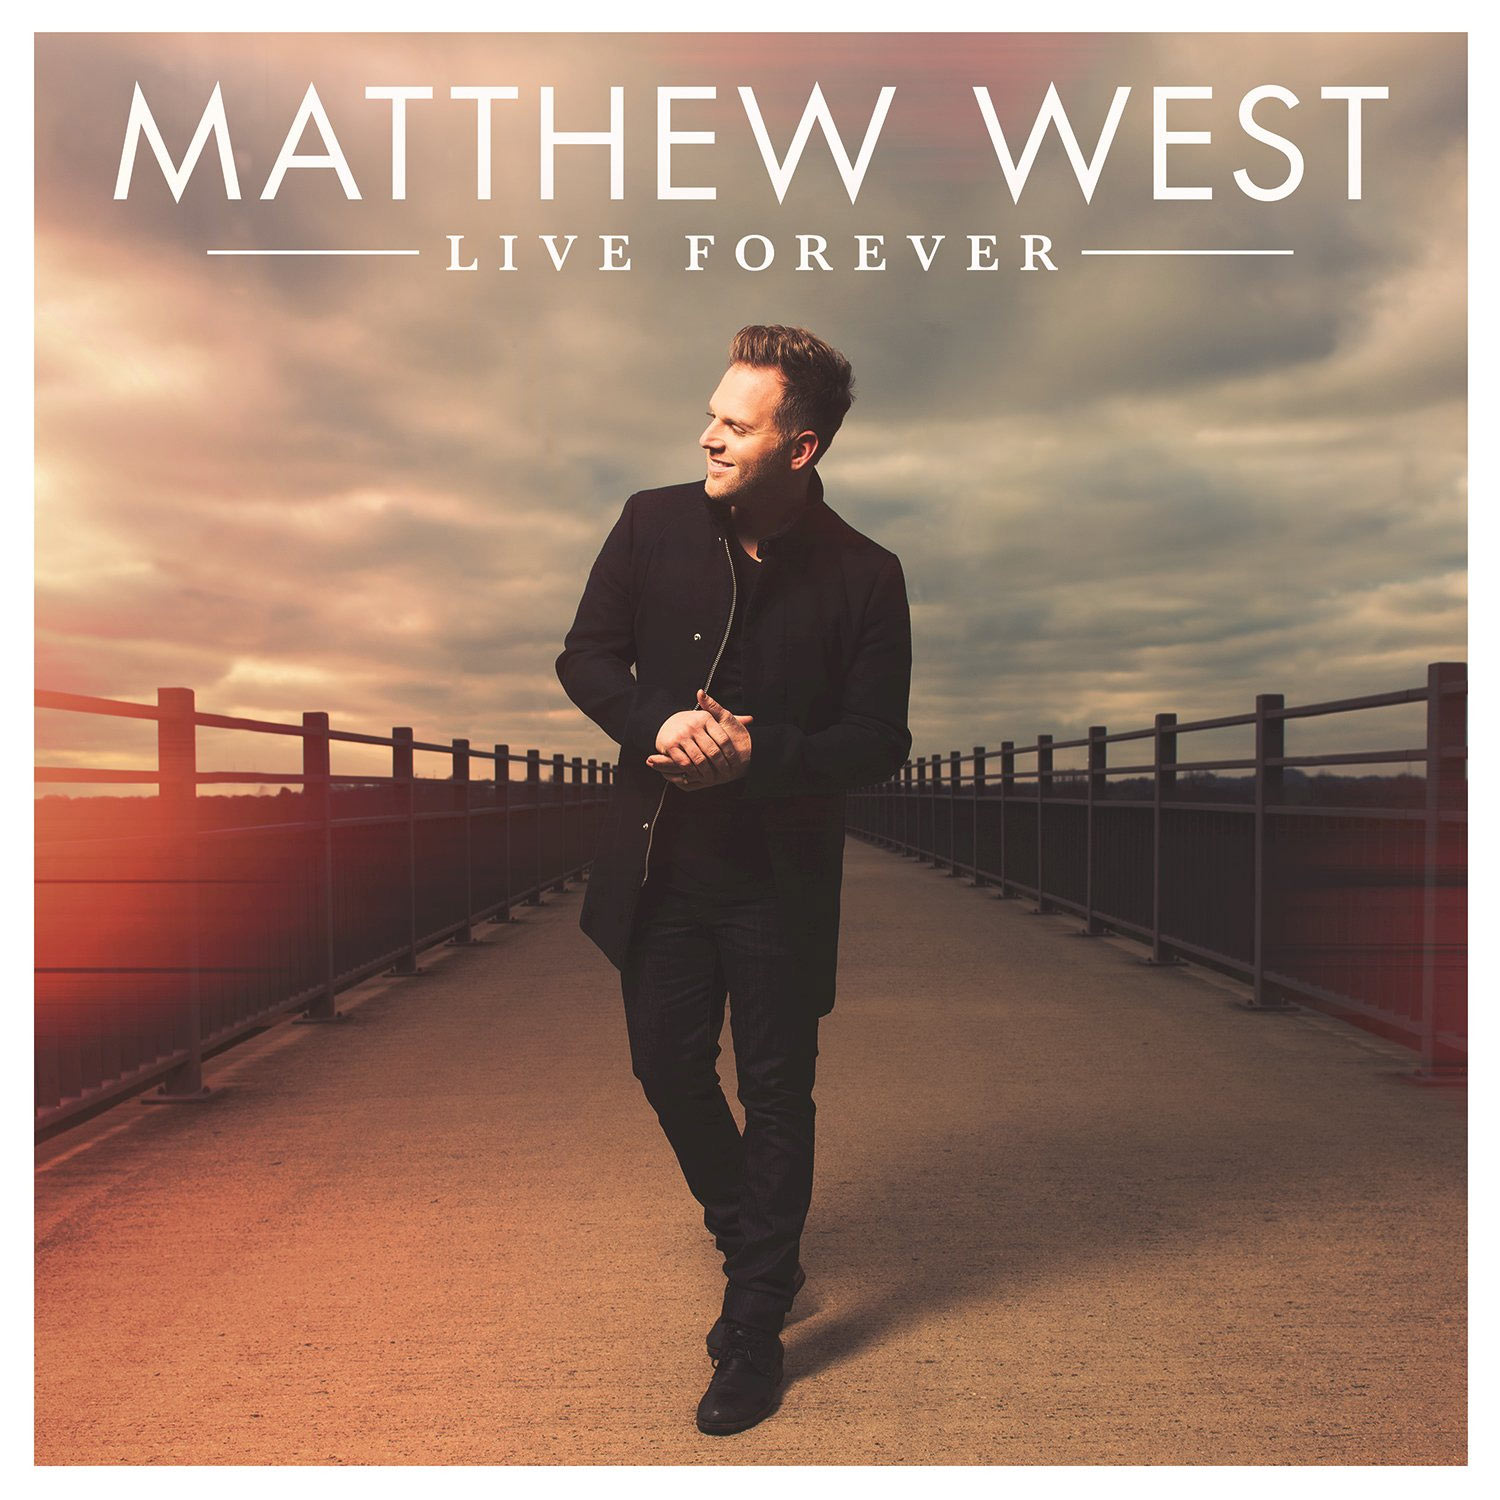 Matthew West, "Live Forever" Review